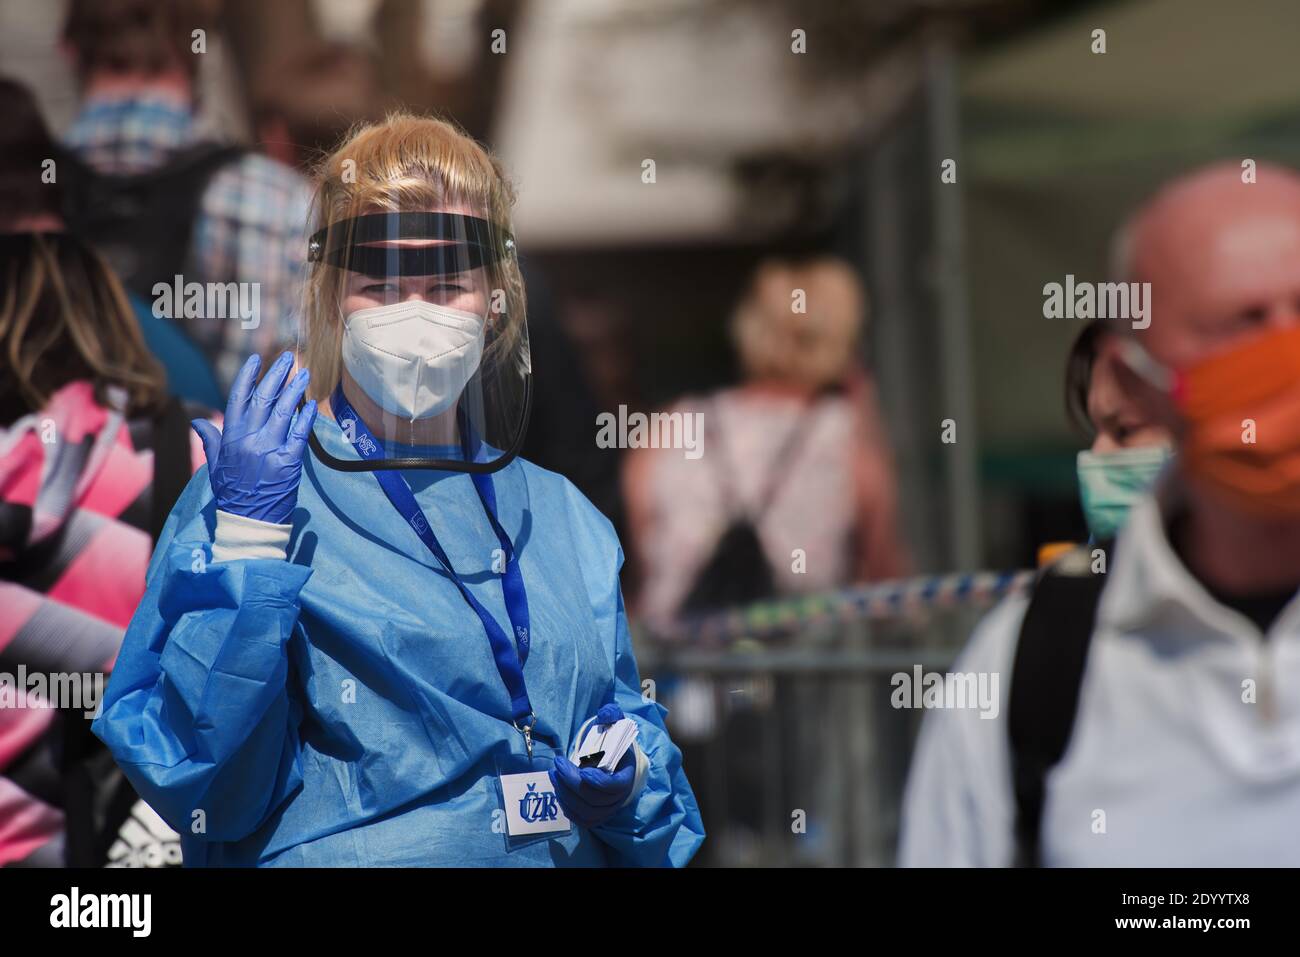 Medic wearing a respirator and plastic face shield waving her hand next to a queue of people waiting for a corona virus test. Stock Photo